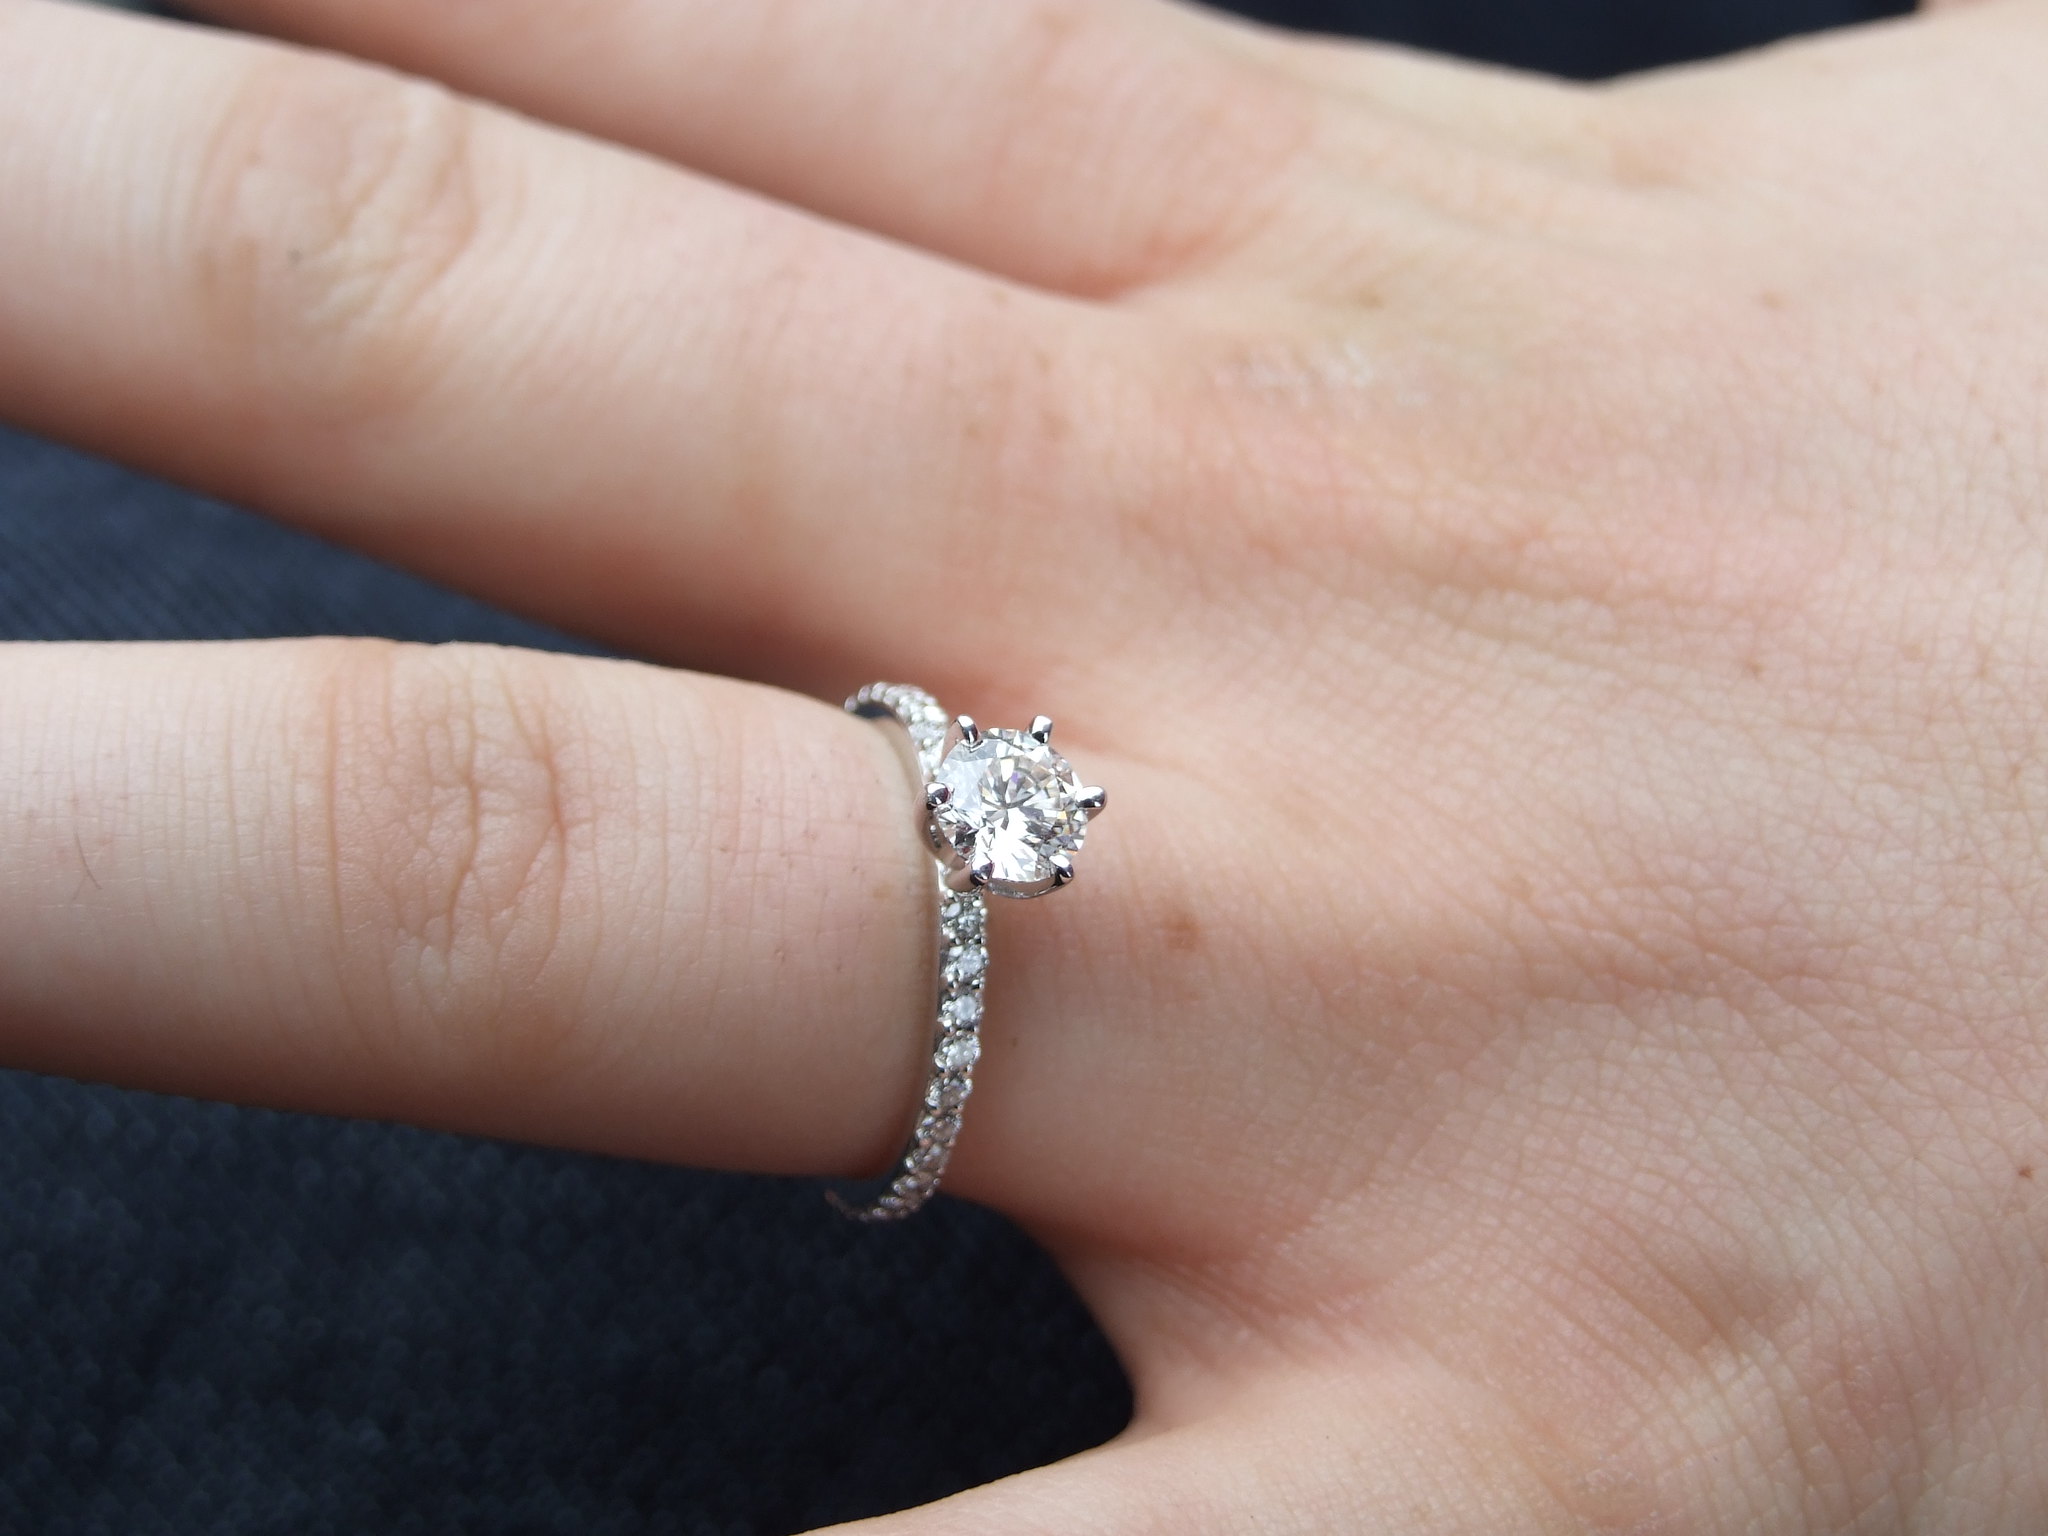 An engagement ring | Source: Flickr.com